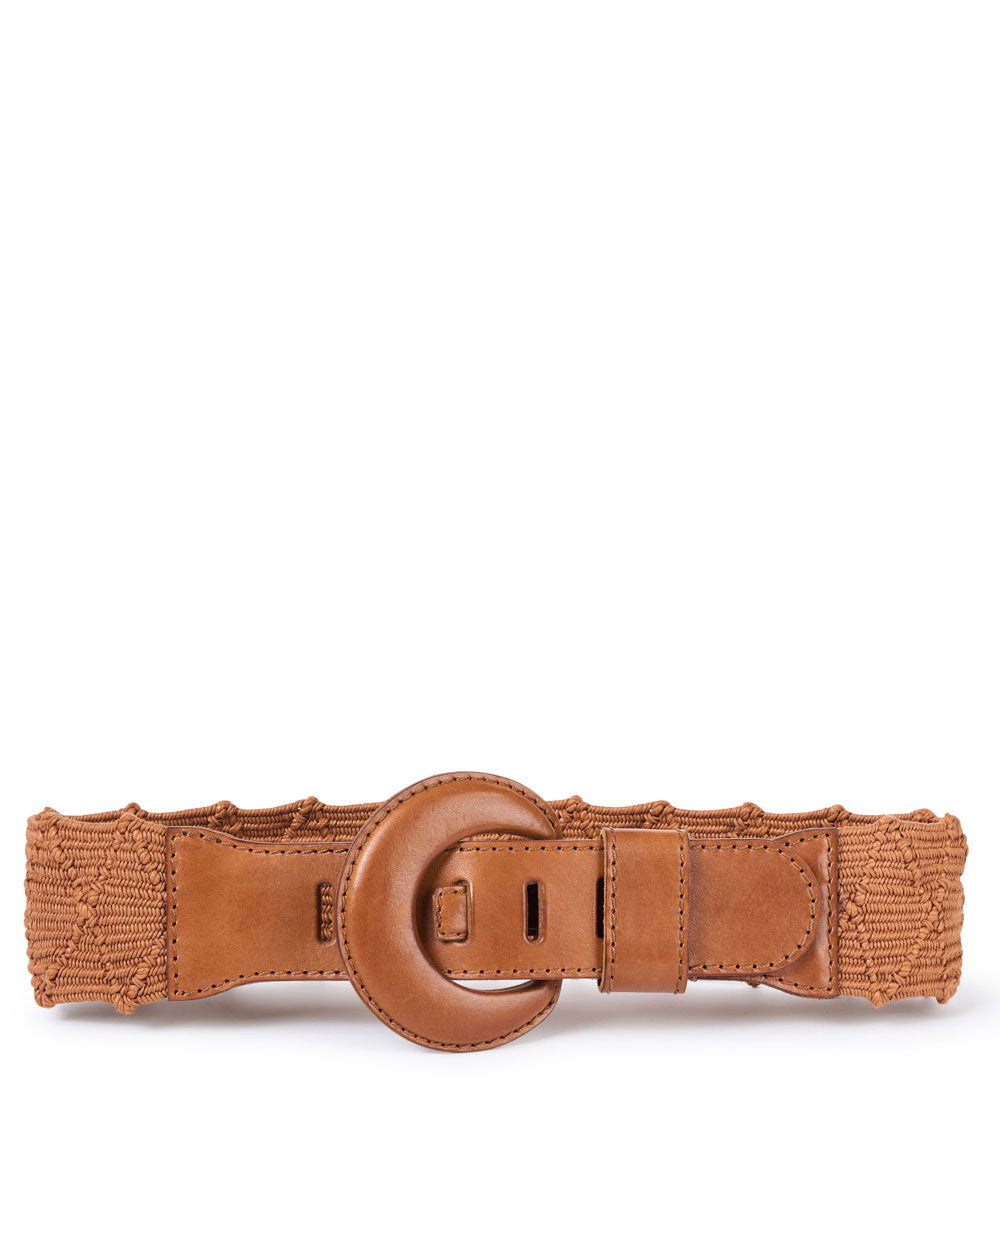 Naxos Black Stretch Woven Leather Belt in Saddle Brown